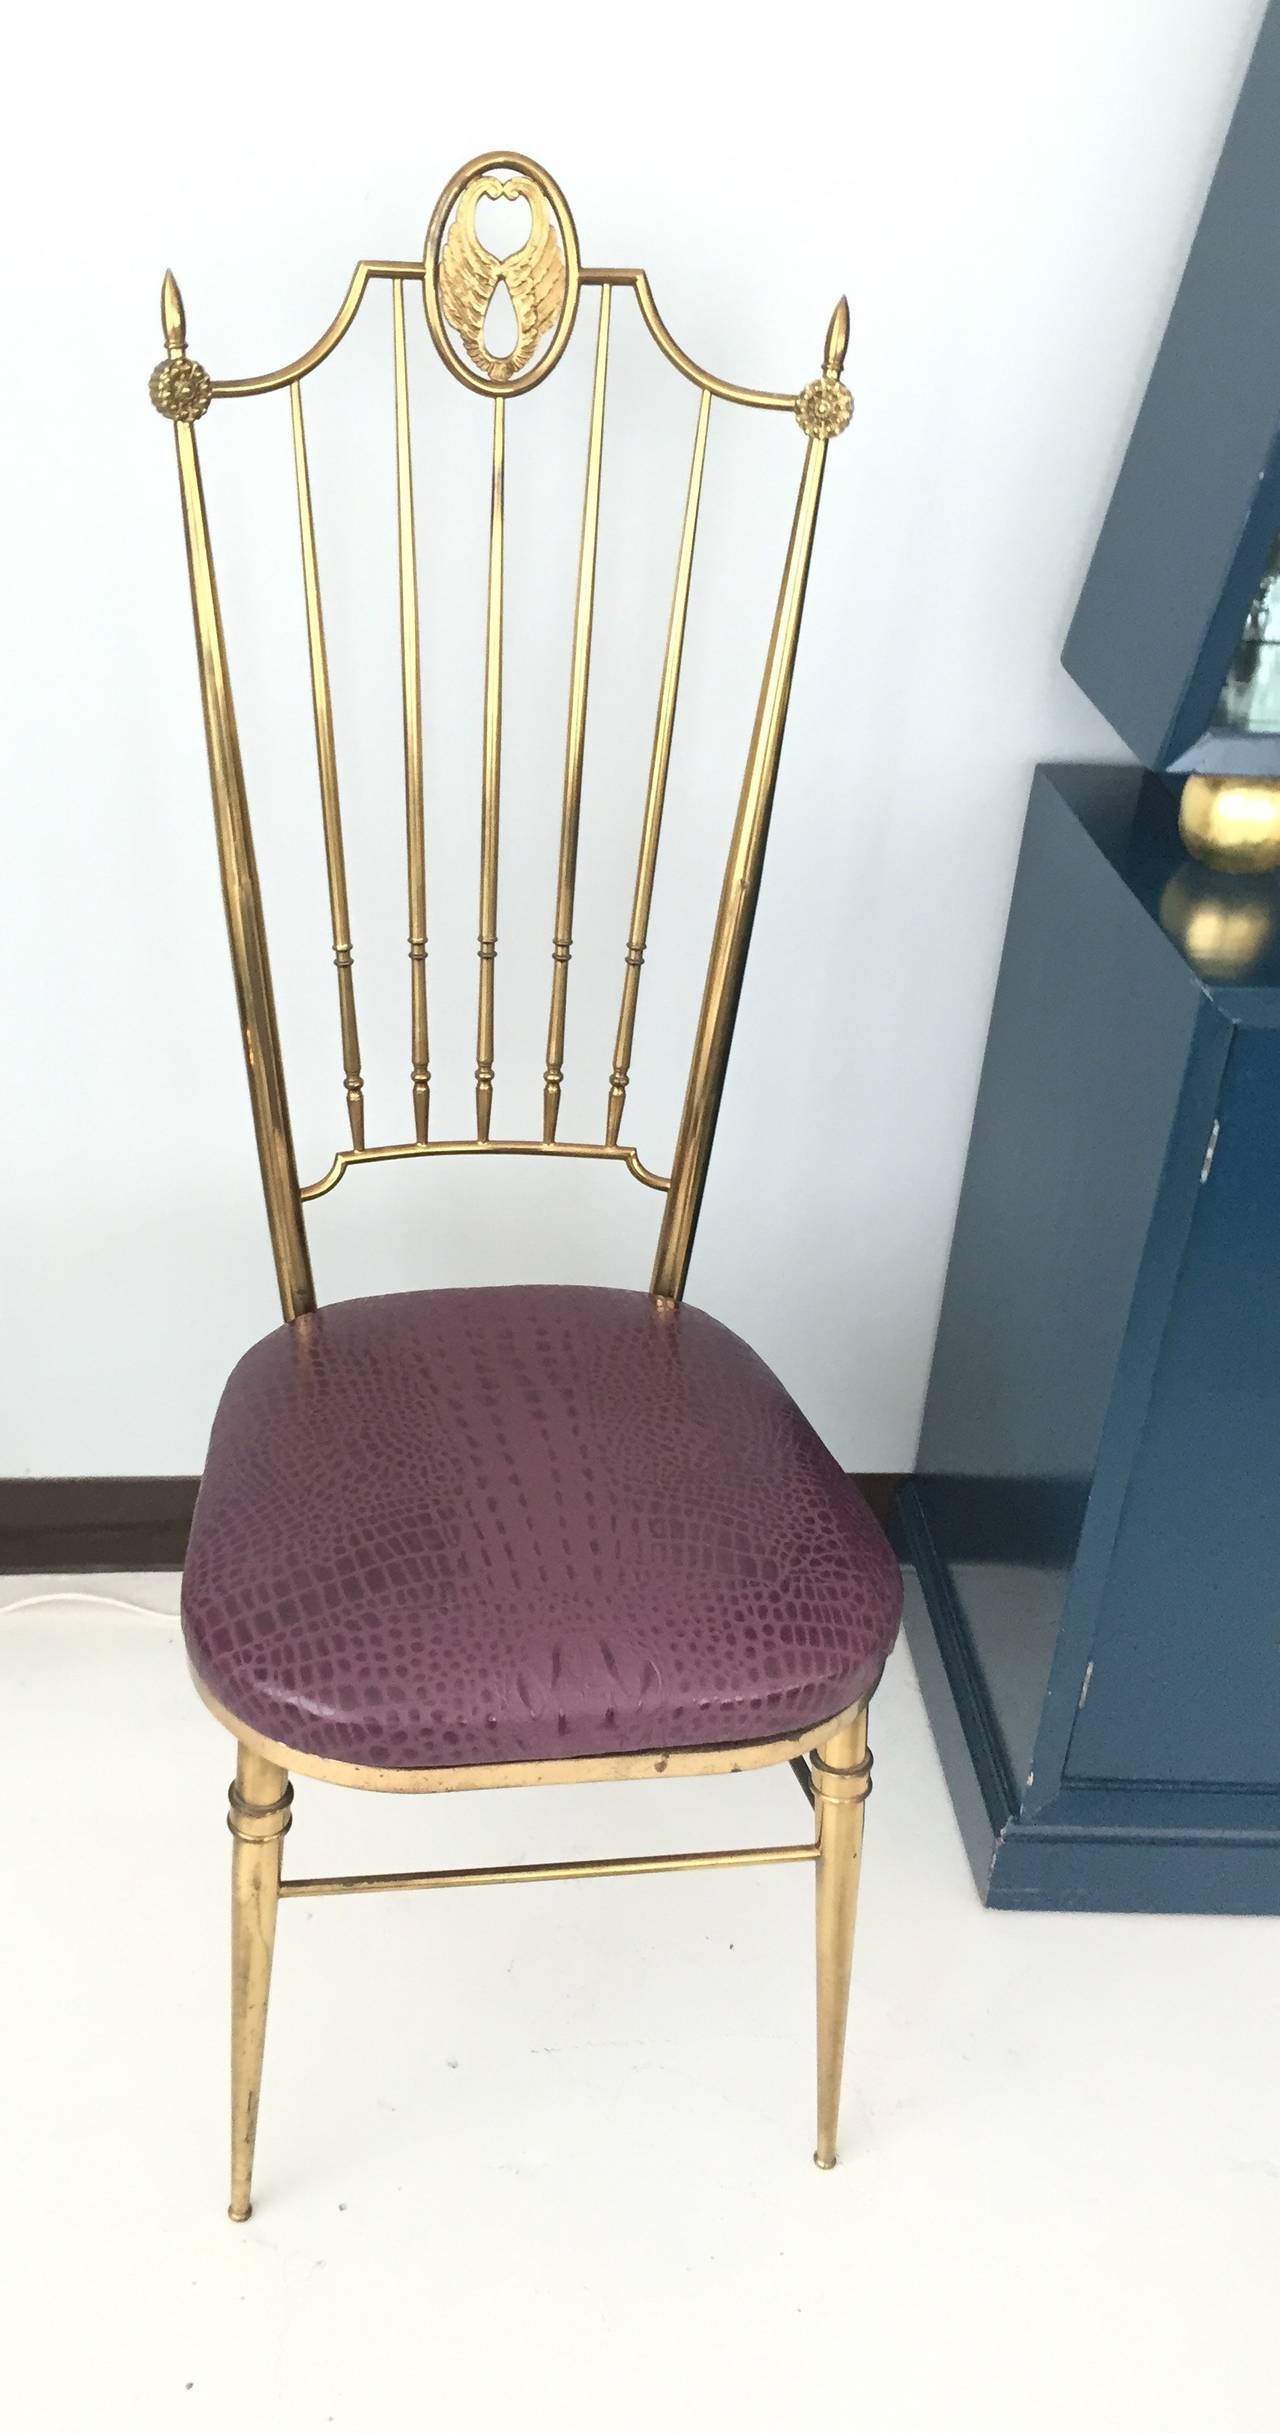 Chiavari style, Tall back Italian side chairs with brass frames, seats in aubergine embossed leather in crocodile pattern. Would work well as a vanity or desk chair. Brass has overall patina with darker spots. Price per chair, pair available